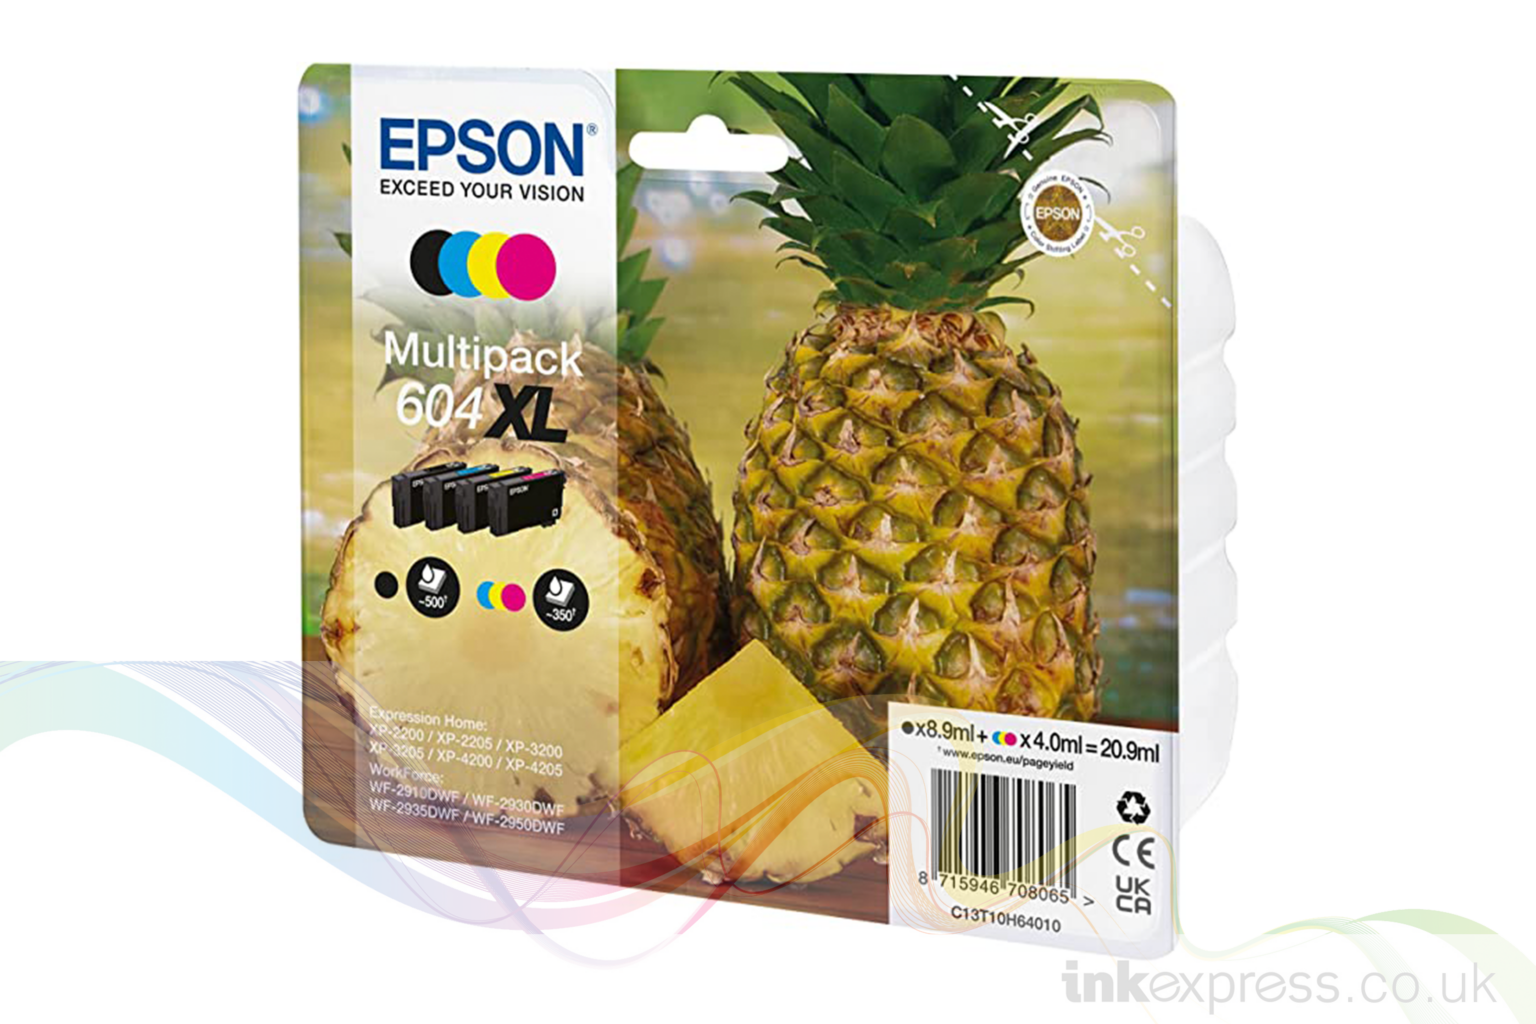 Multipack Epson 4 Colours 604xl Ink Cartridges Ink Express 5993